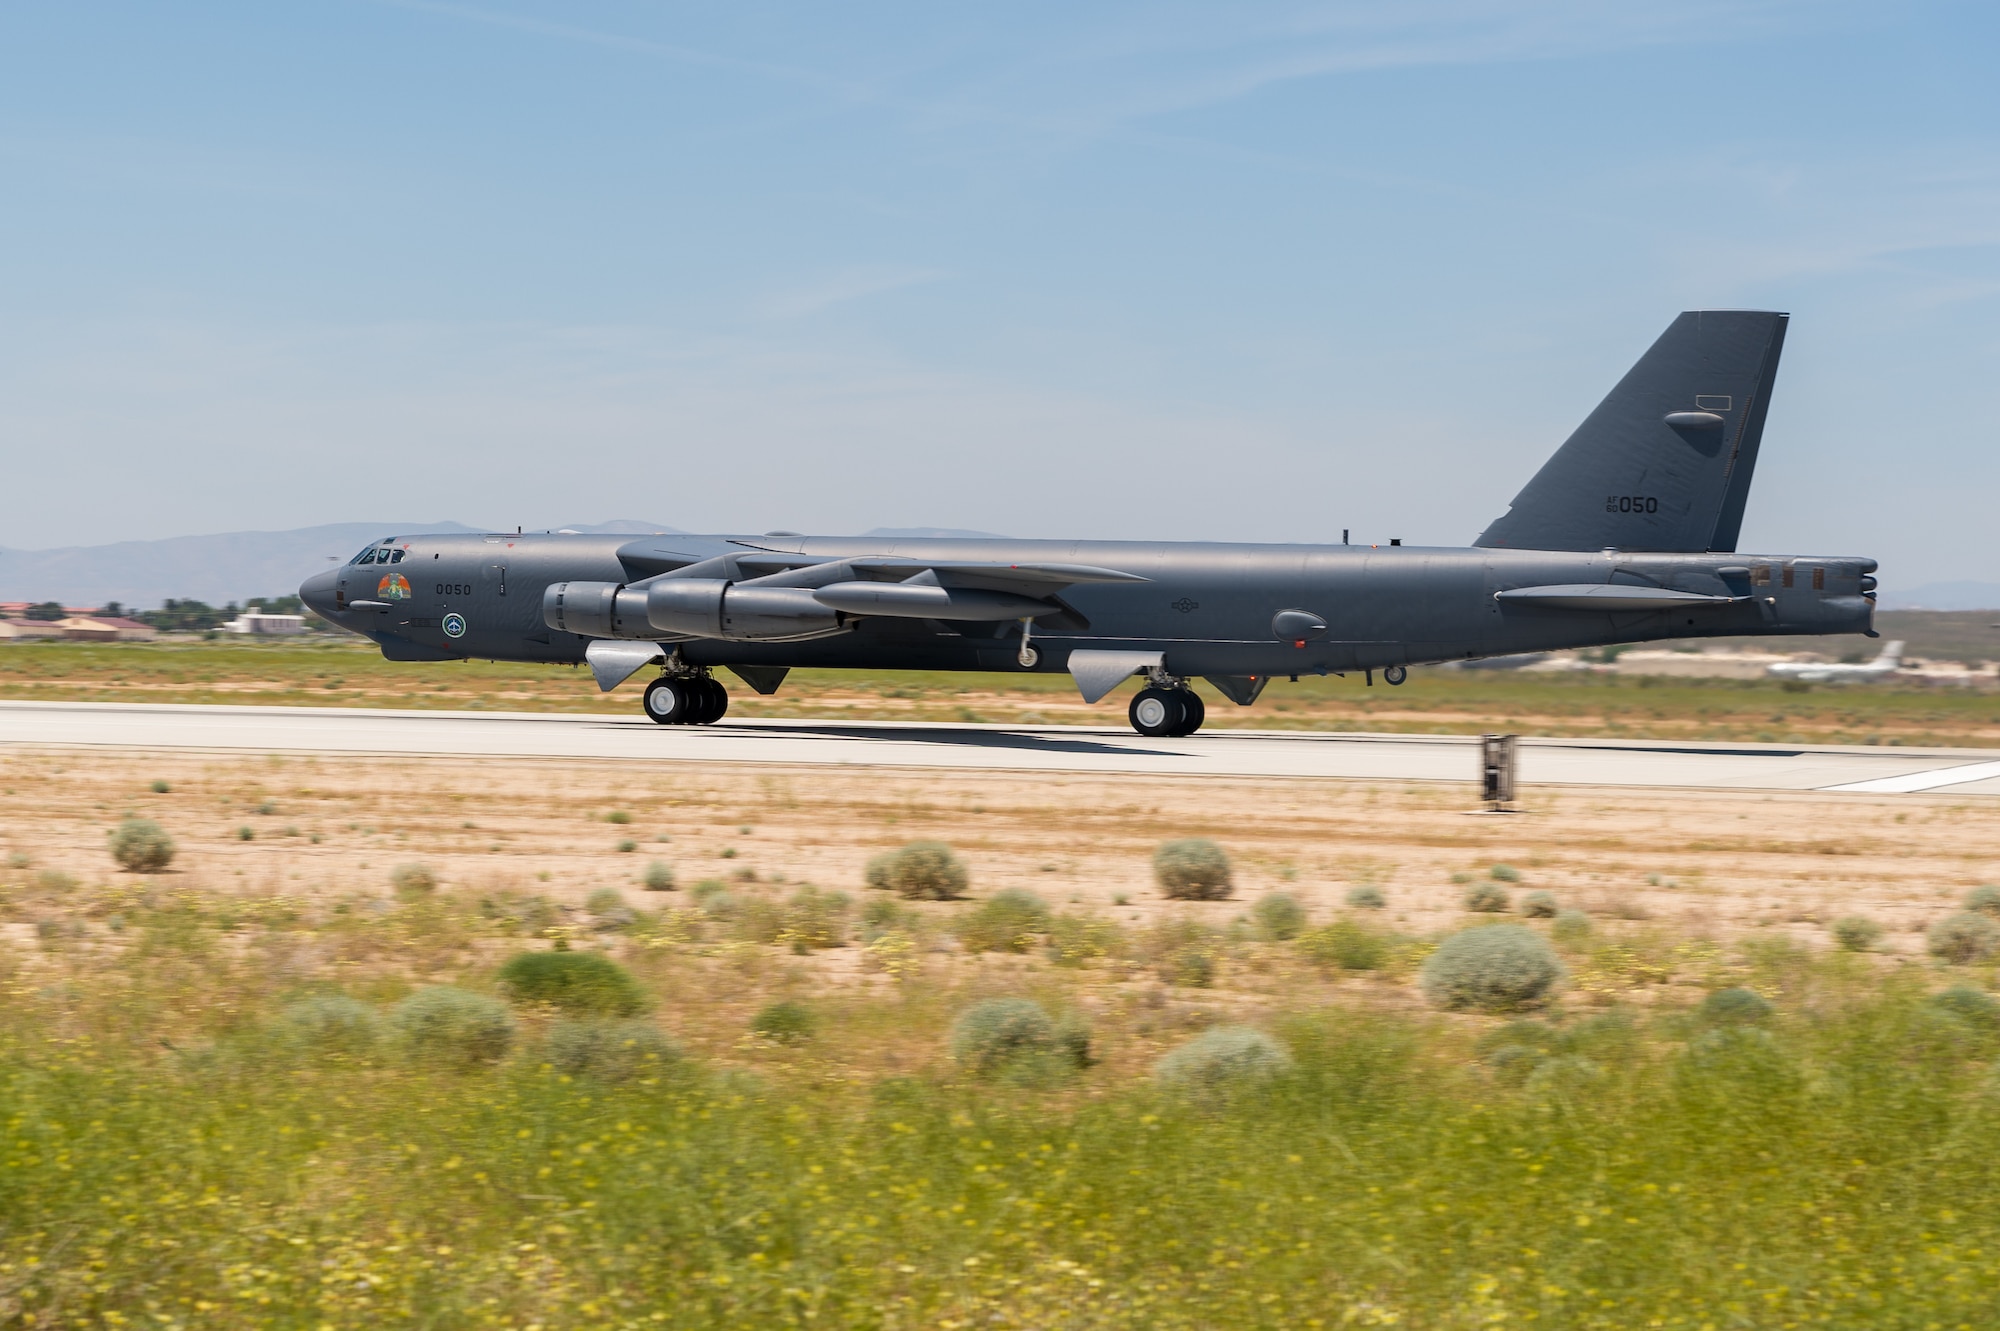 A B-52 from Edwards Air Force Base, California, will conduct a flyover over the Antelope Valley Area or the "Aerospace Valley" March 14. (Air Force photo by Ethan "Evac" Wagner)